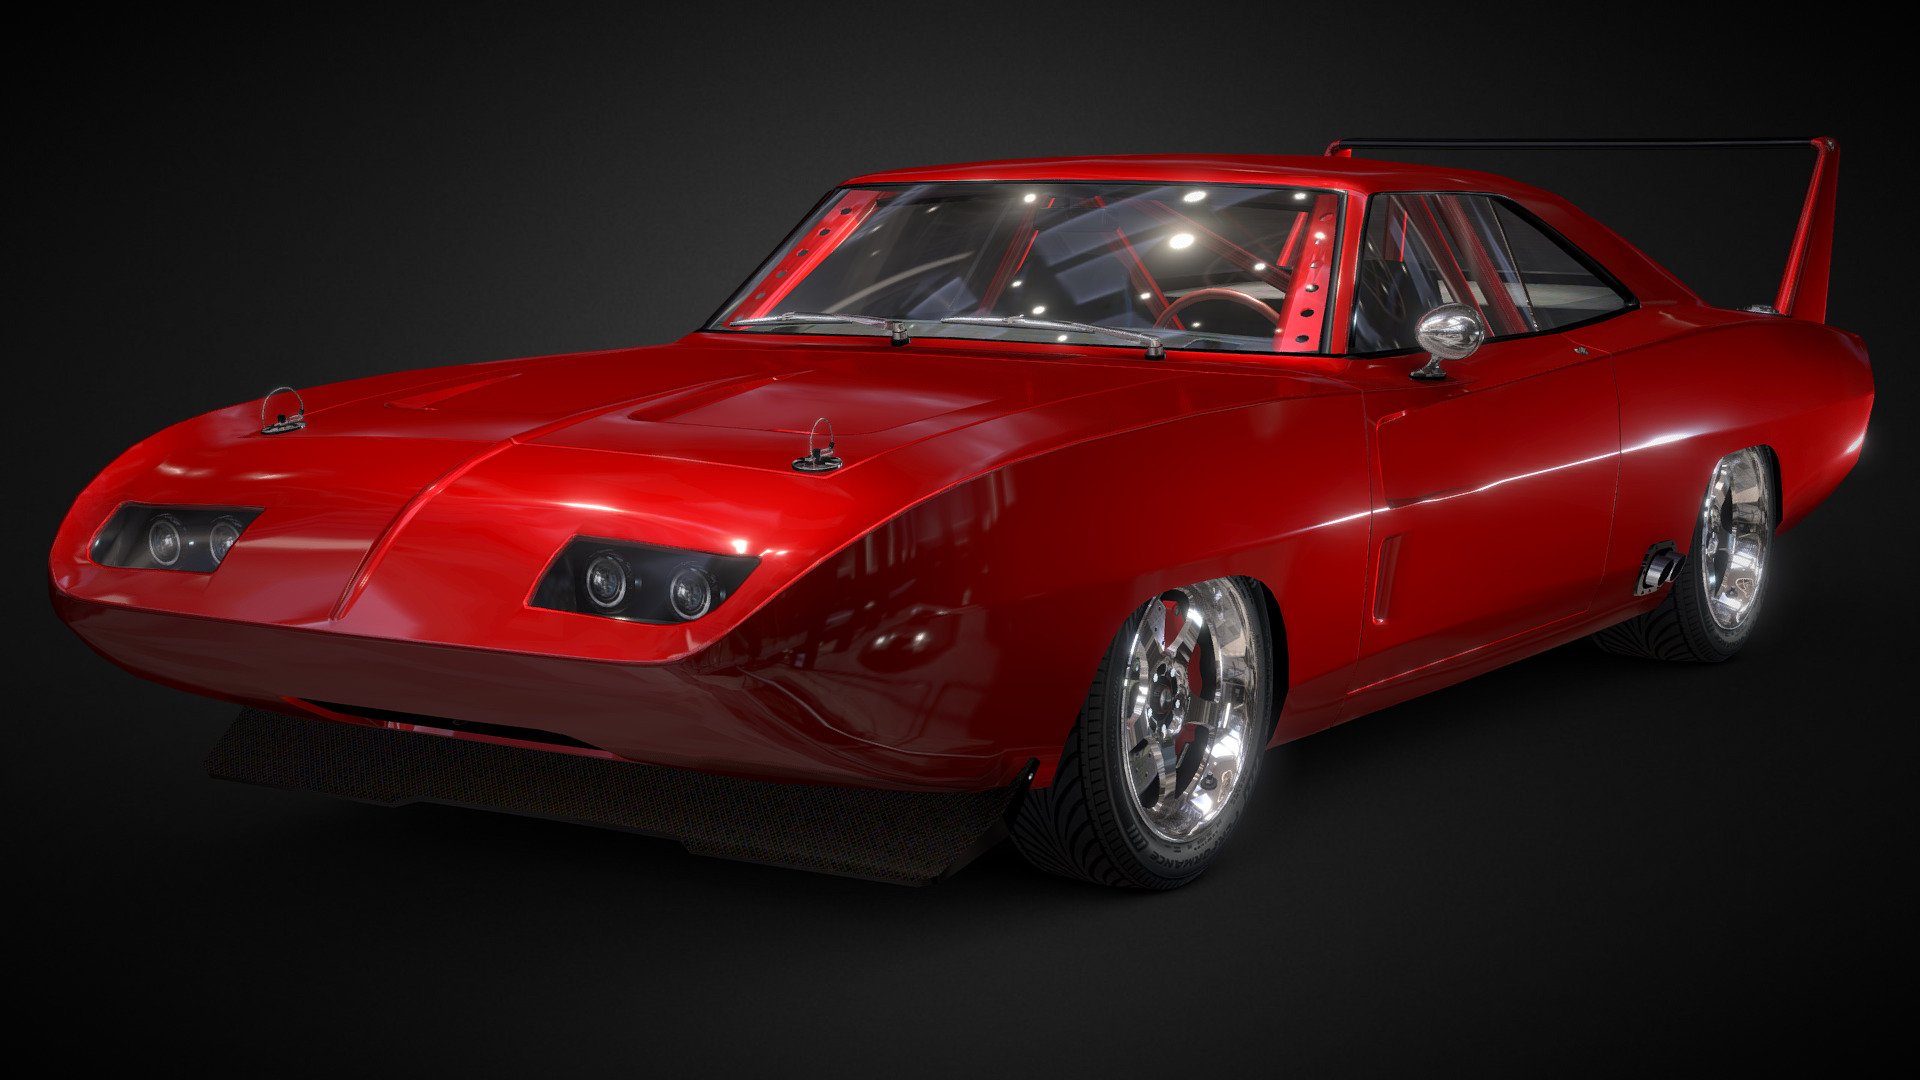 Dom's Dodge Charger Daytona 1969 Fast&Furious 6 - Download Free 3D model by  ᗩᒪE᙭. Kᗩ.? (@.) [307126f]